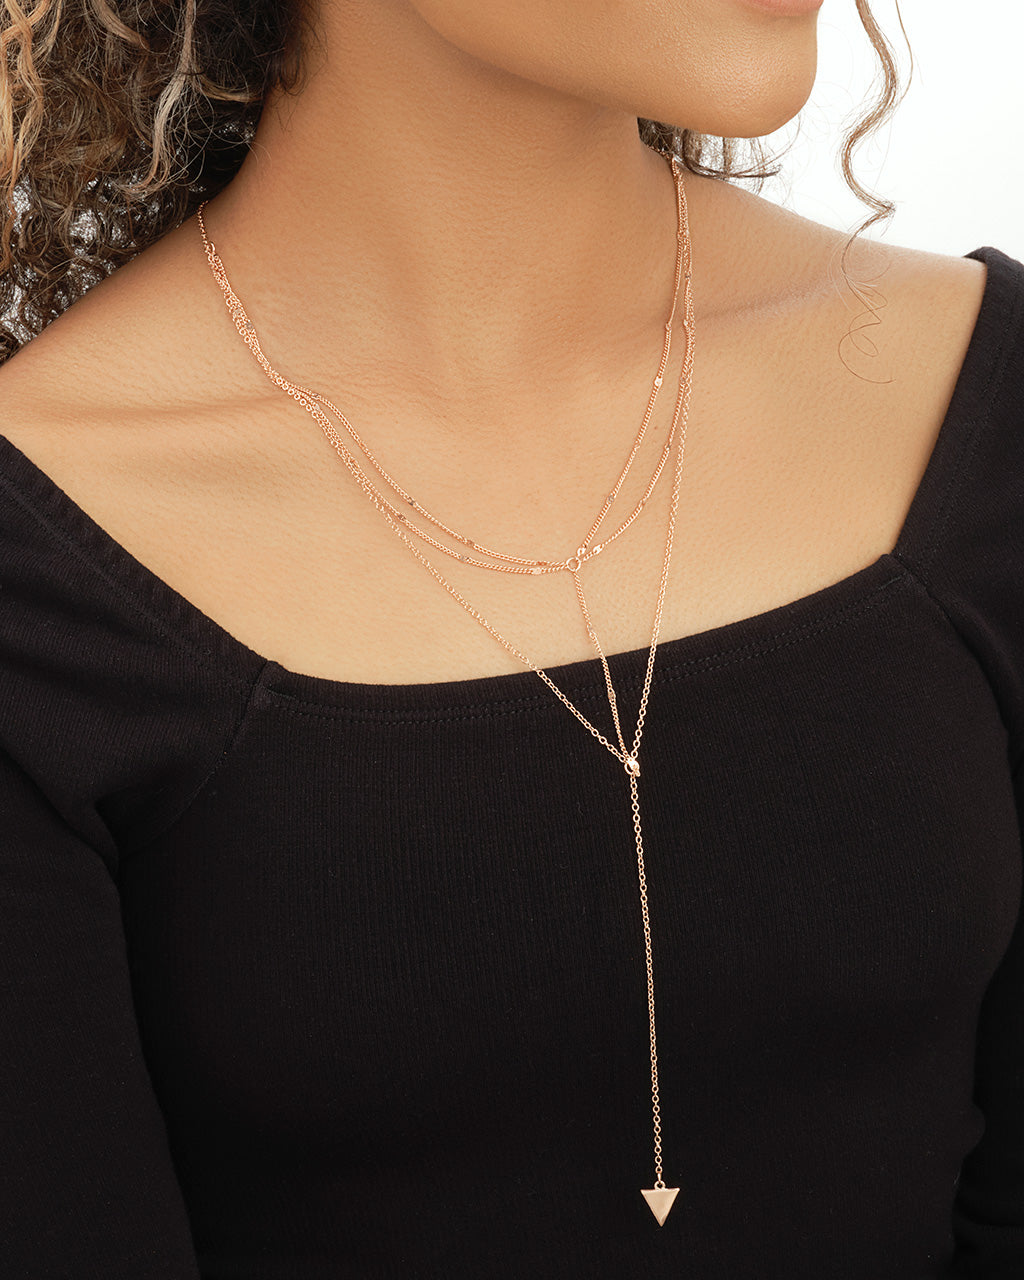 Triple Layer Triangle Drop Chain Necklace Necklace Sterling Forever 